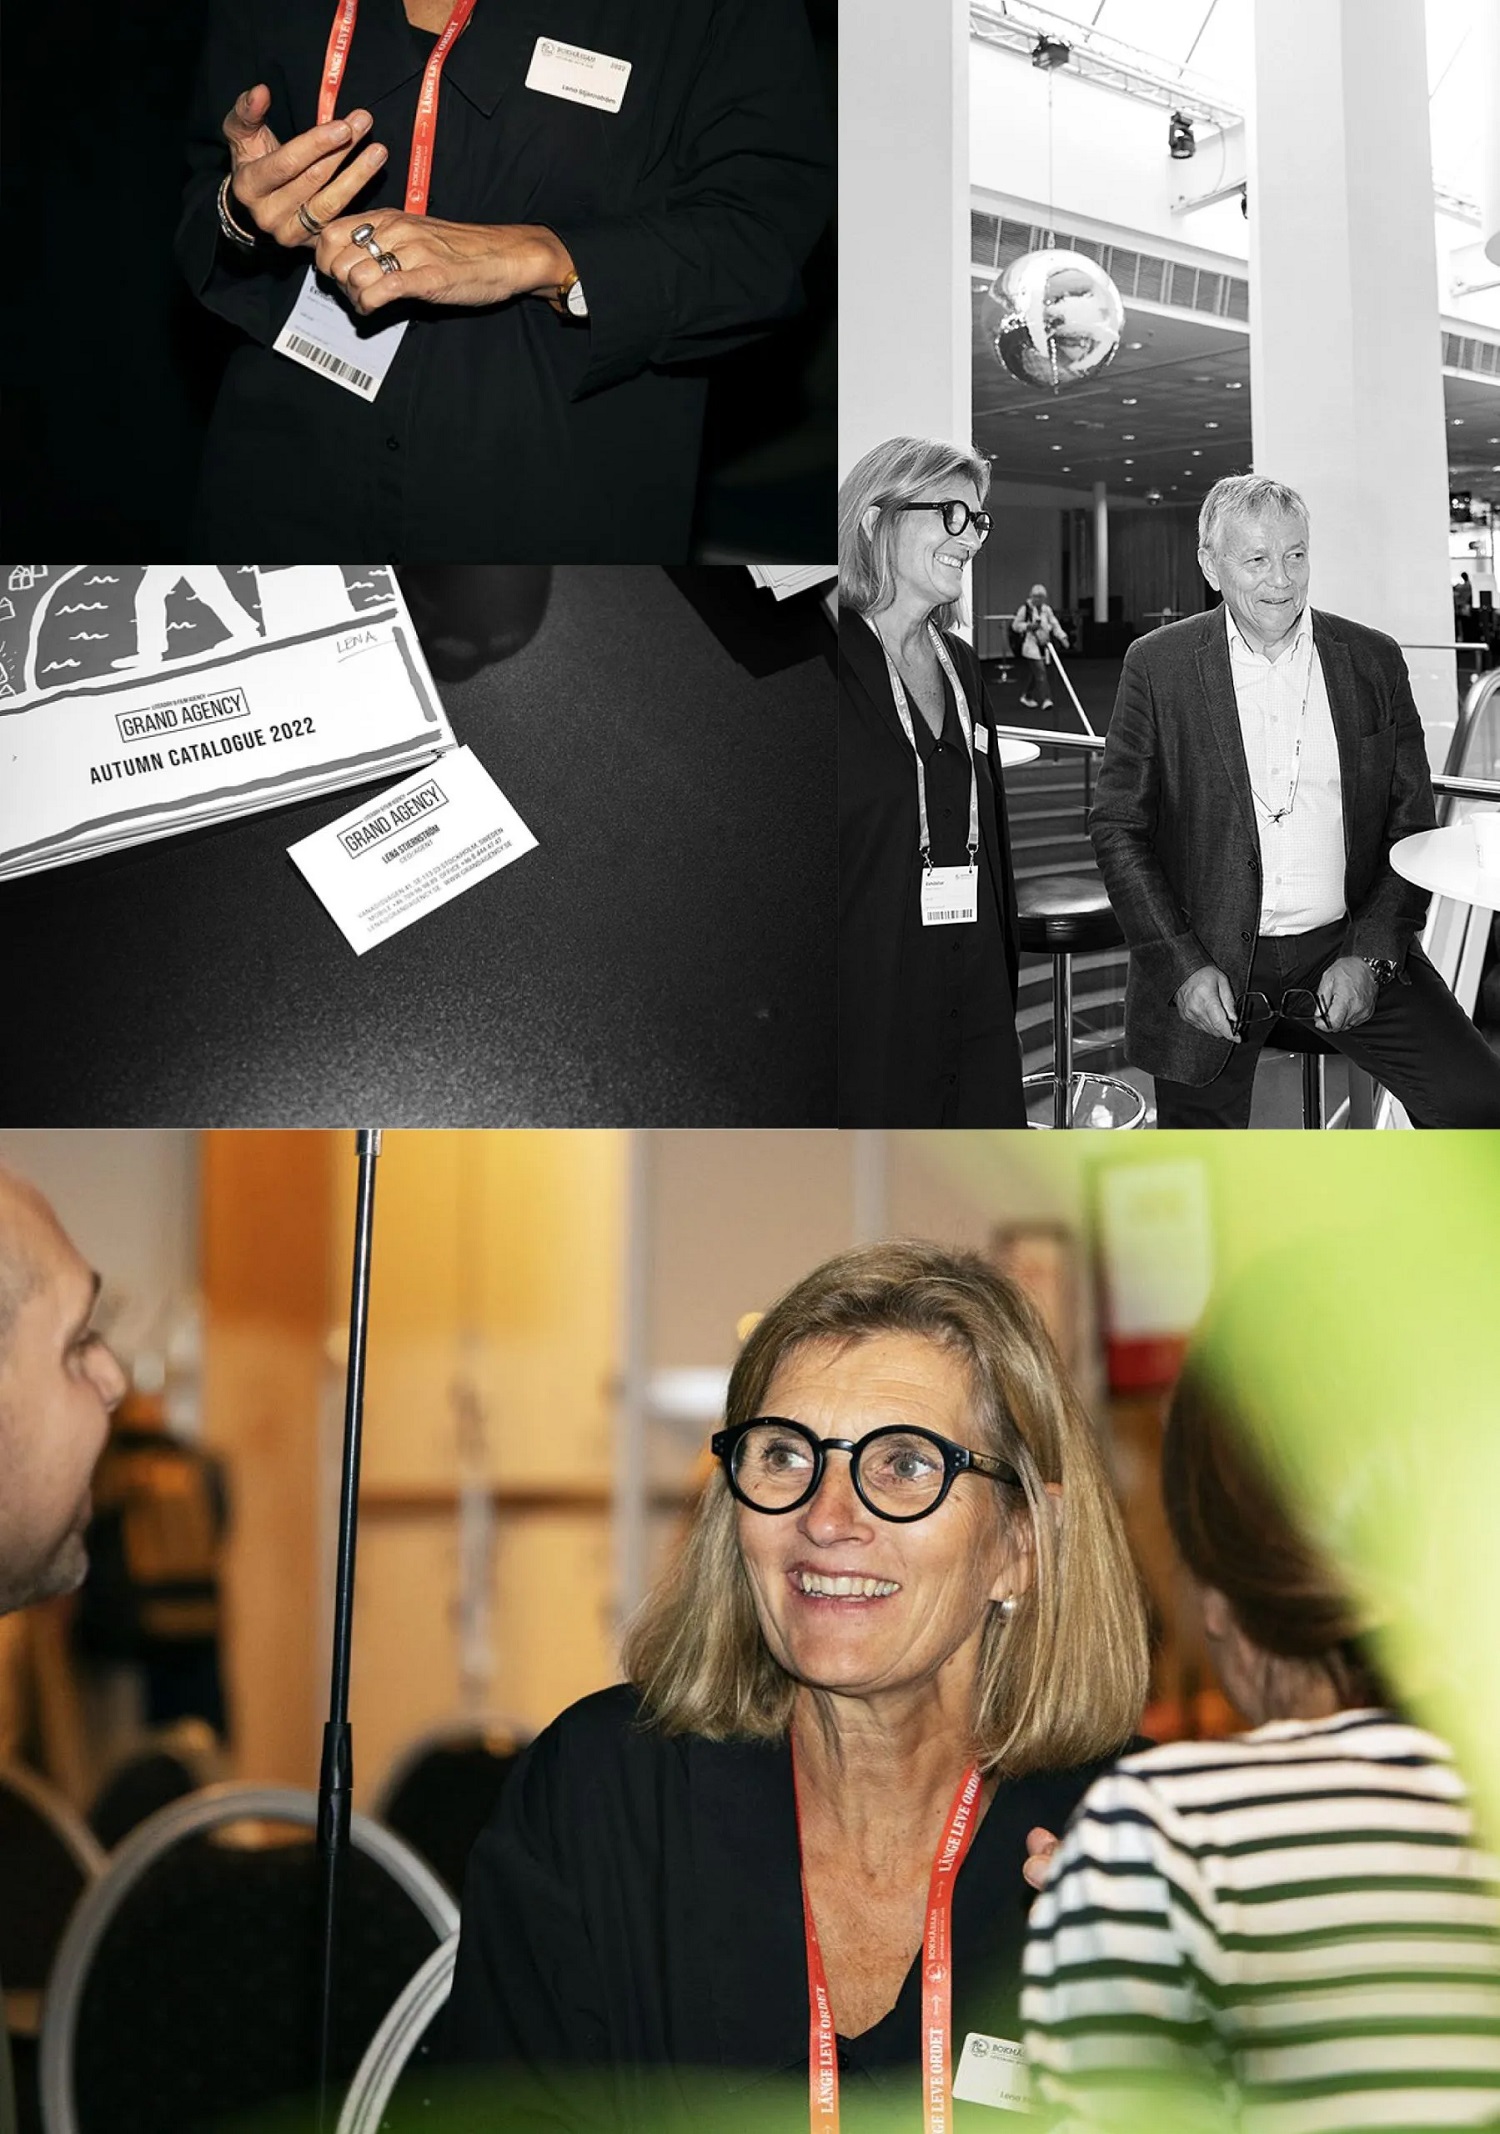 Composite image featuring a man and a woman at a seated meeting, a woman with glasses smiling at a meeting, a business card and hands in front of a book fair lanyard.